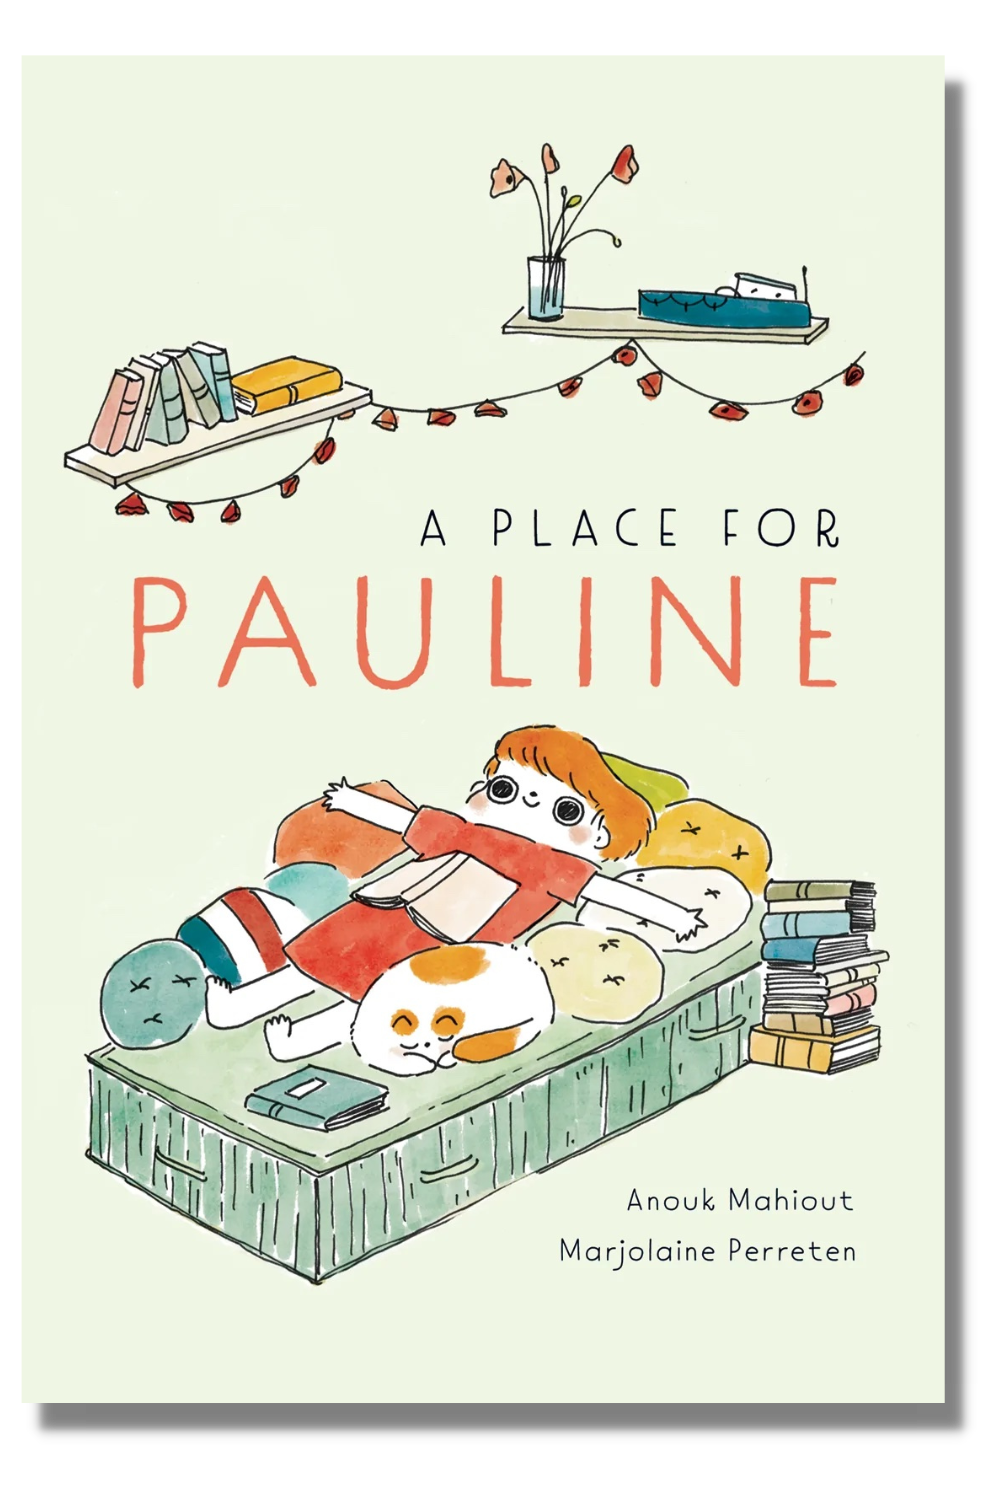 The cover of "A Place for Pauline"